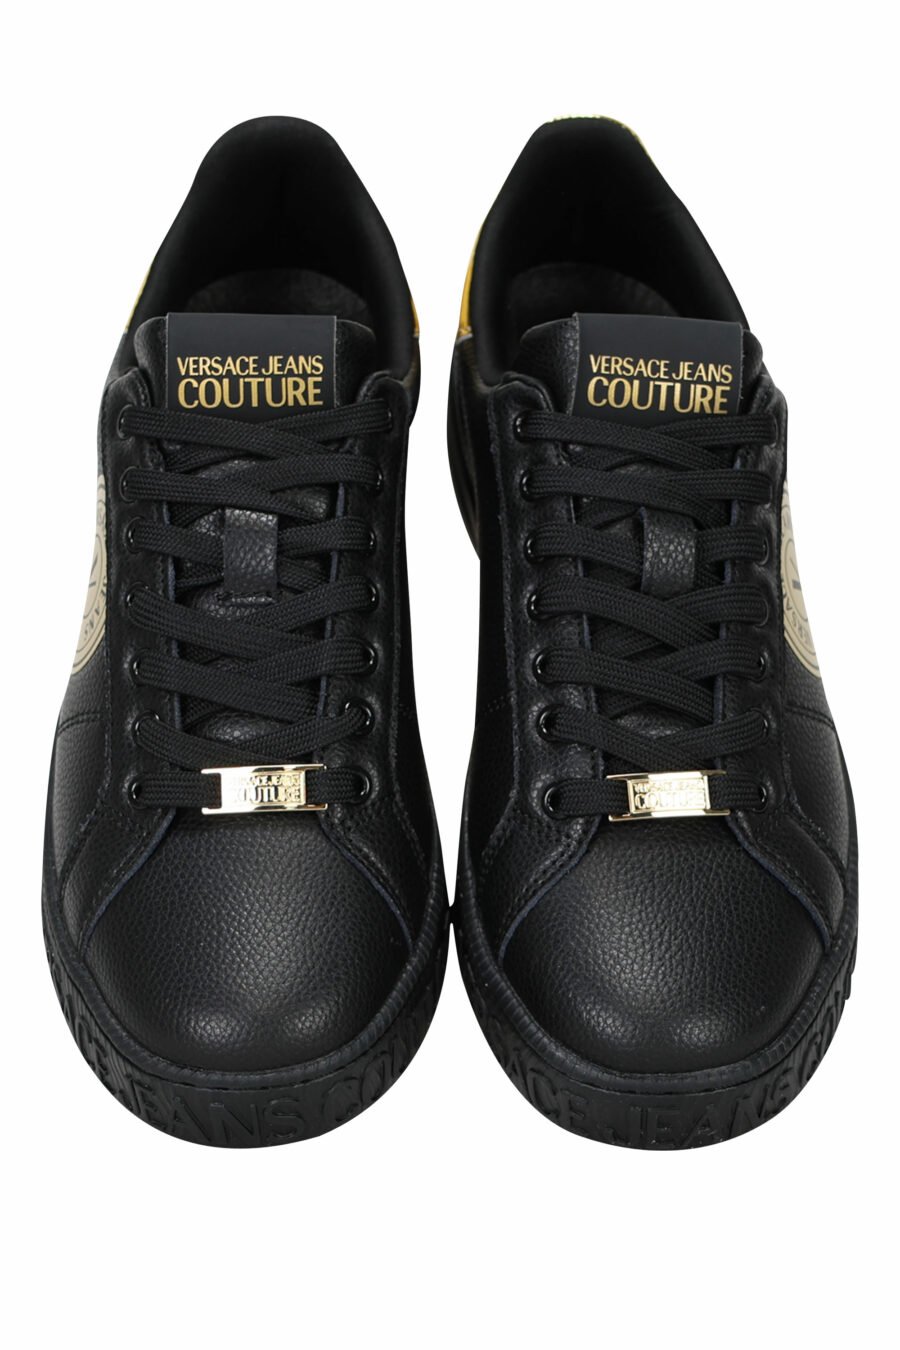 Black leather trainers with gold details and circular logo - 8052019453560 4